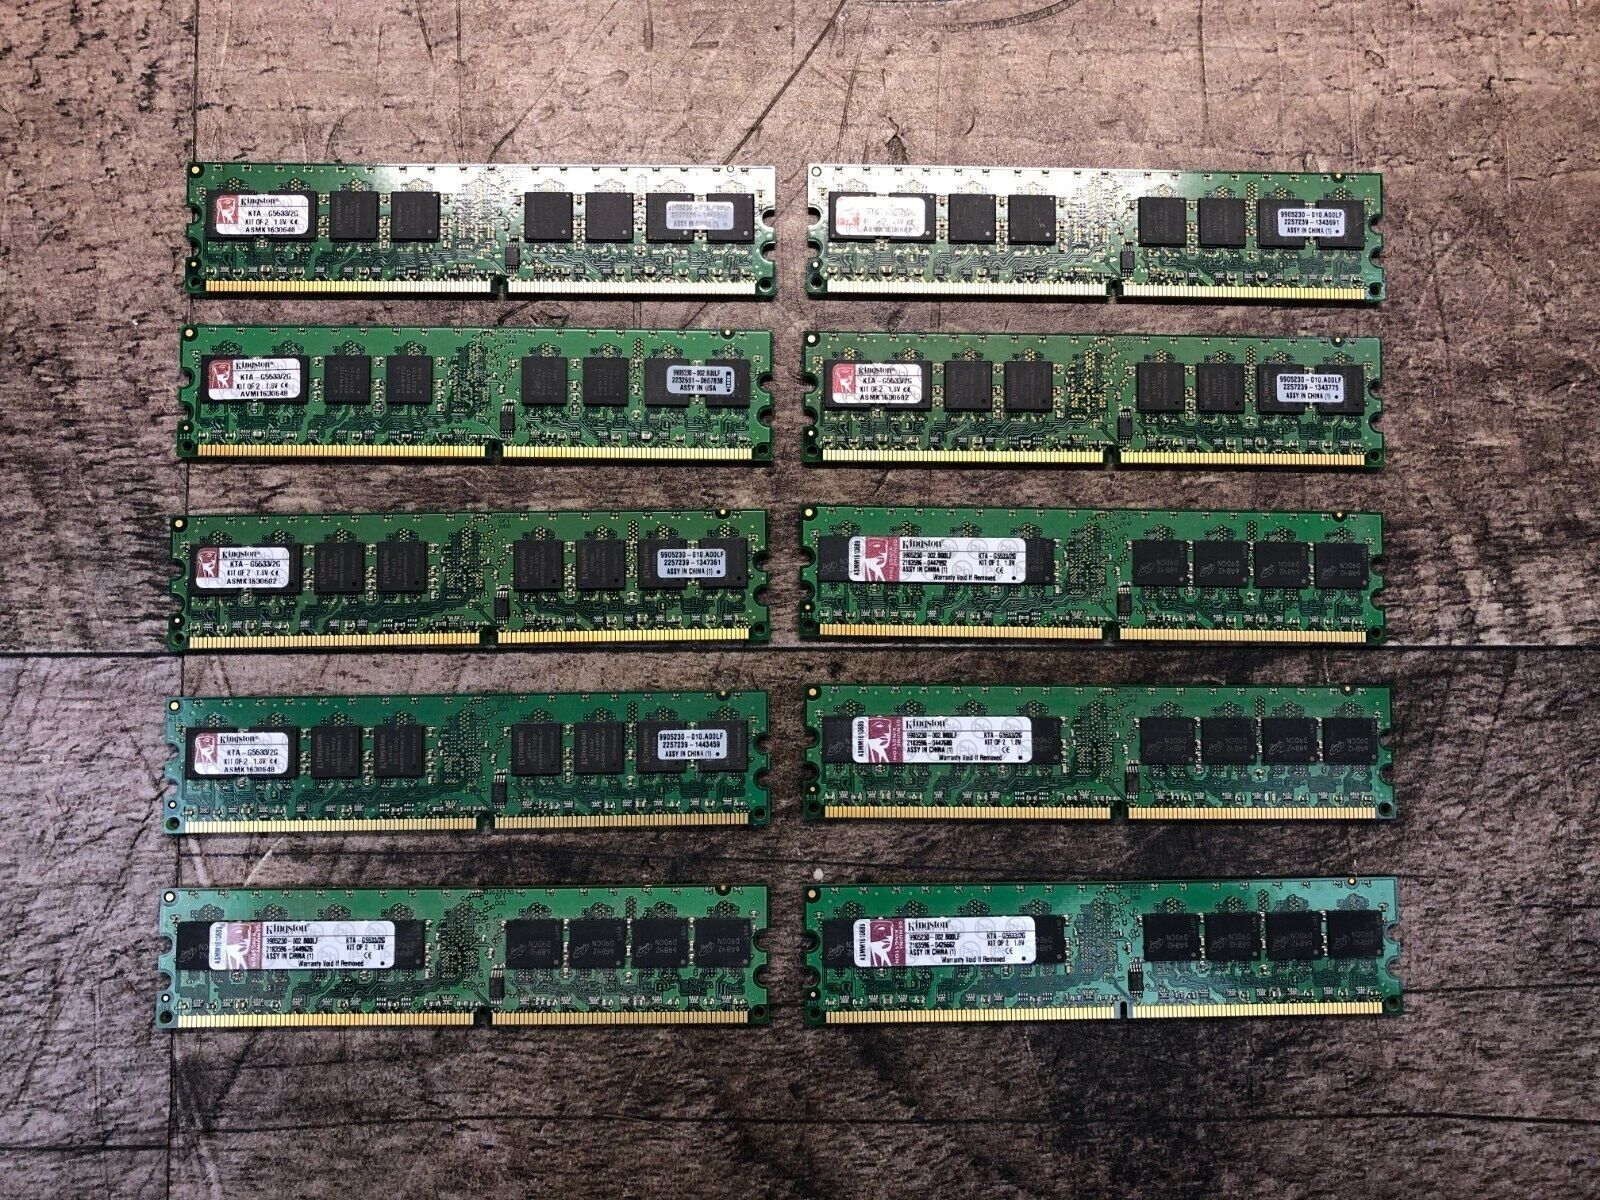 Lot of 10 Kingston KTA-G5533/2GB Kit of 2 RAM *Pulled from working system*